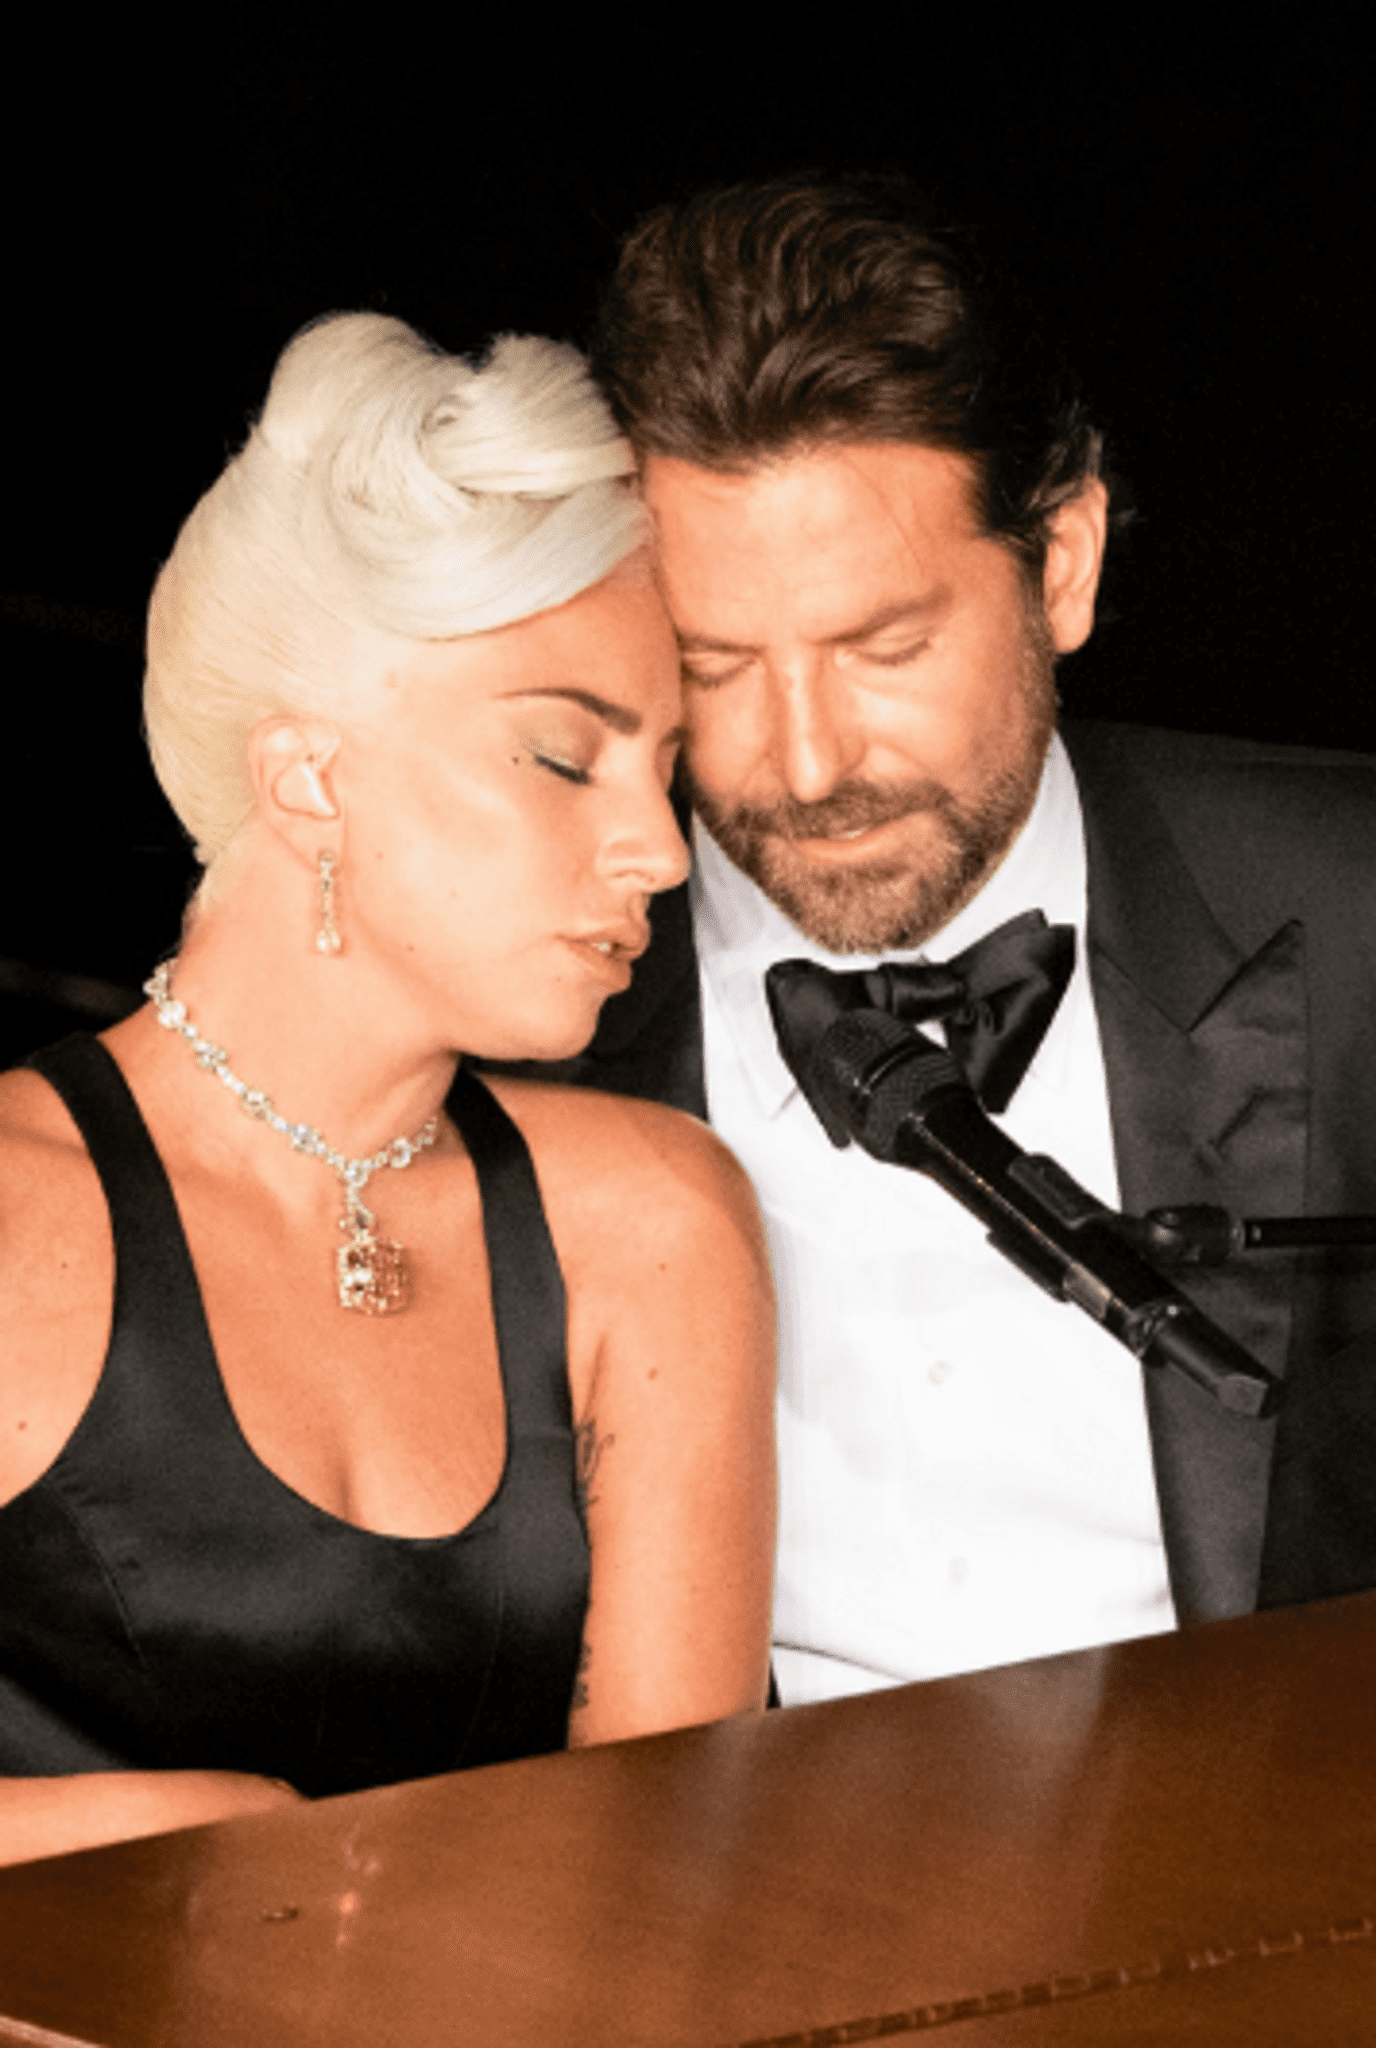 ”bradley-cooper-finally-revealed-the-truth-about-his-relationship-with-lady-gaga”